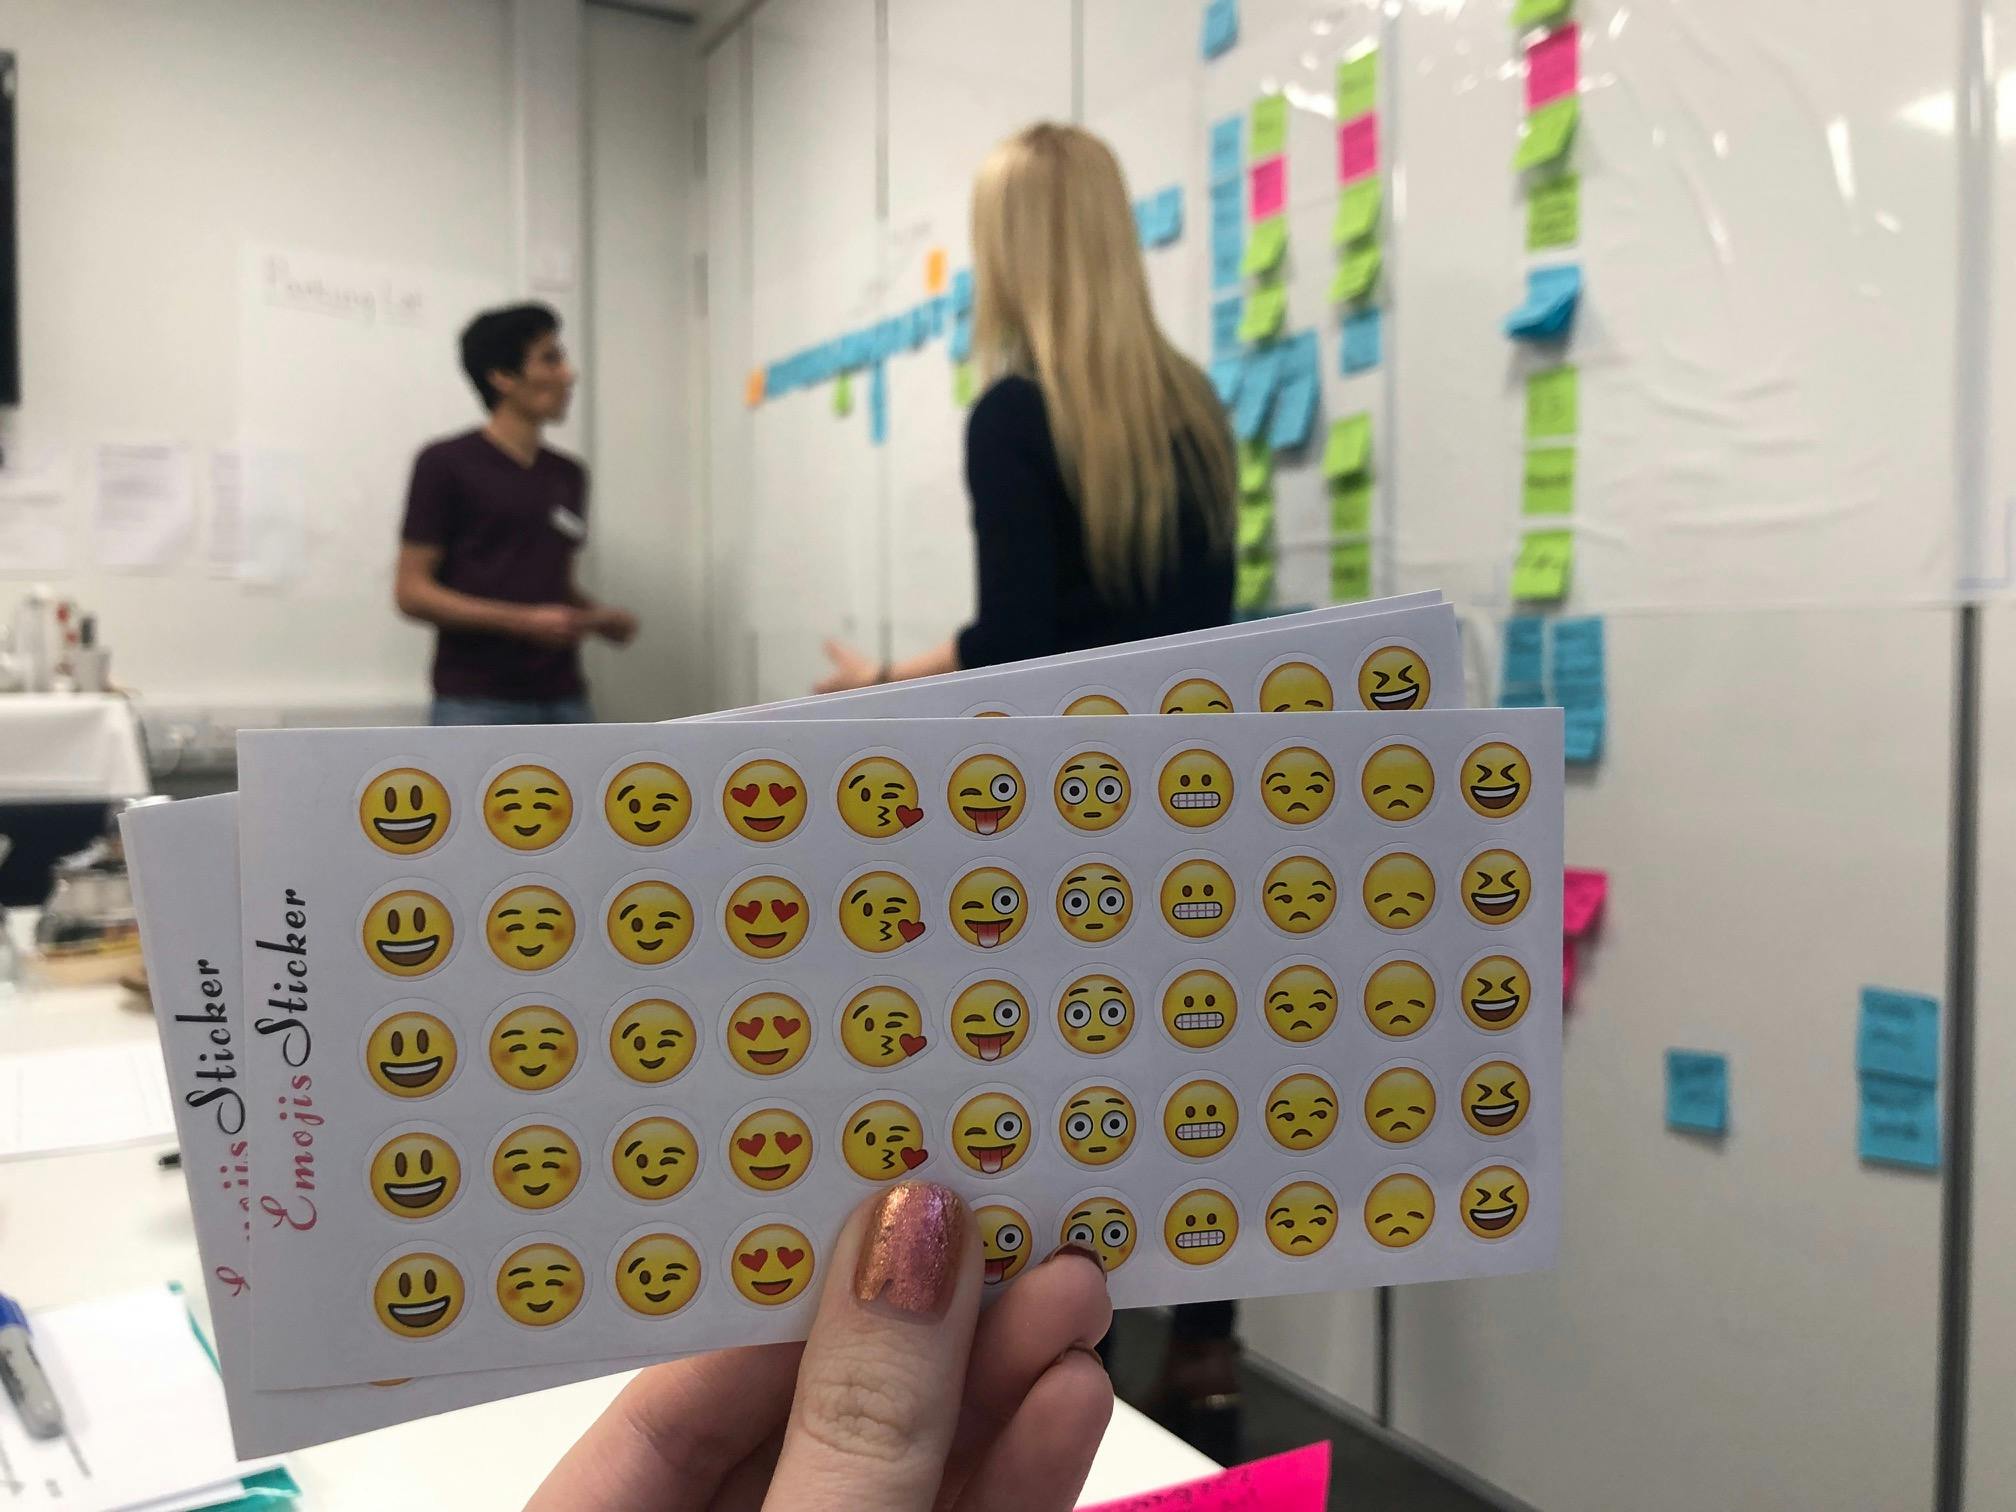 image of emoji stickers in front of someone facilitating